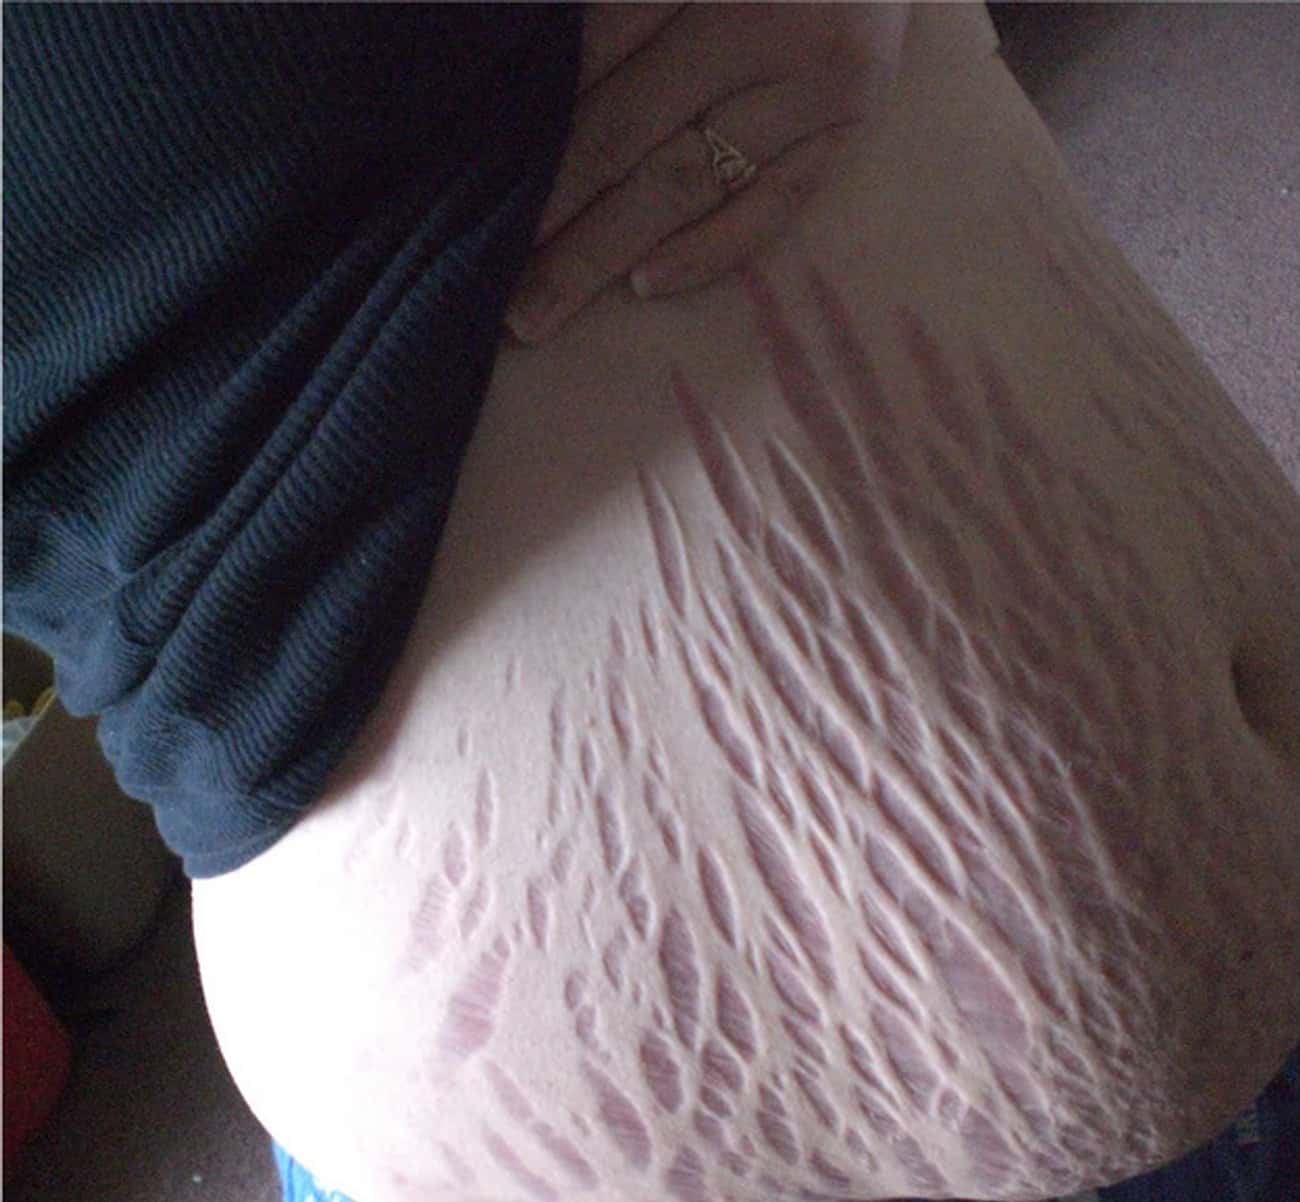 These Super Intense Stretch Marks